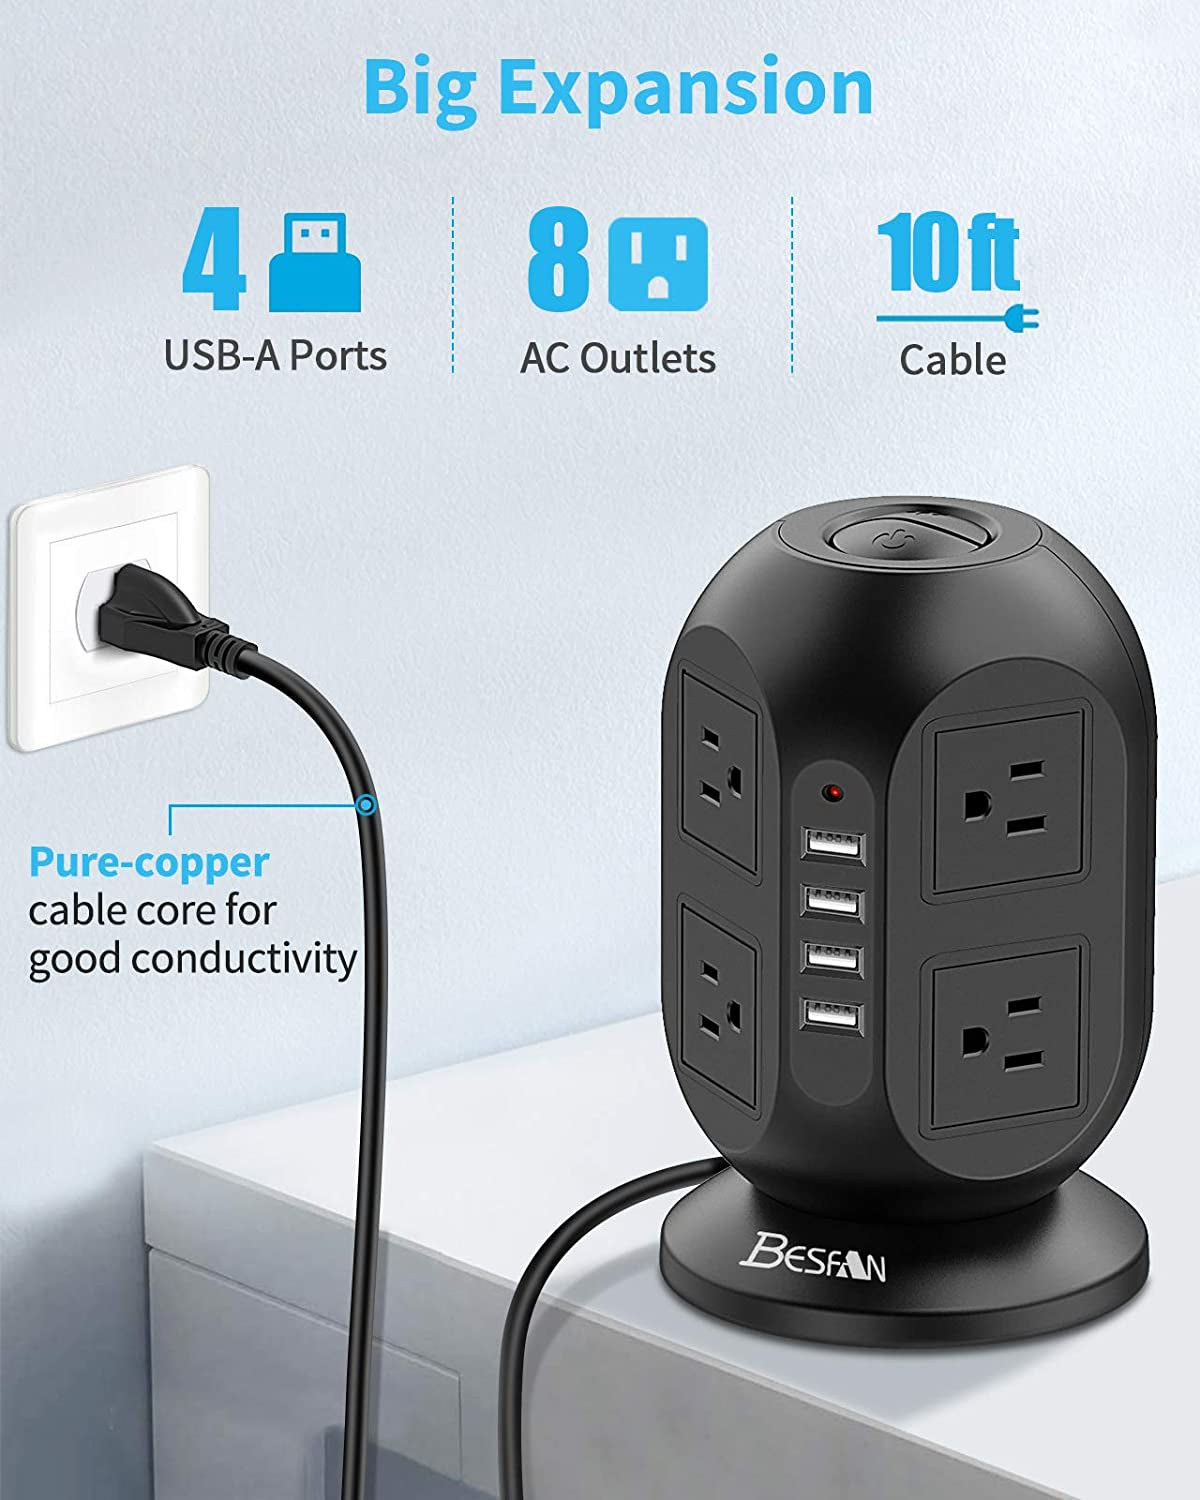 "Premium Tower Power Strip Surge Protector with Extended Cord – Safely and Efficiently Charge All Your Devices!"